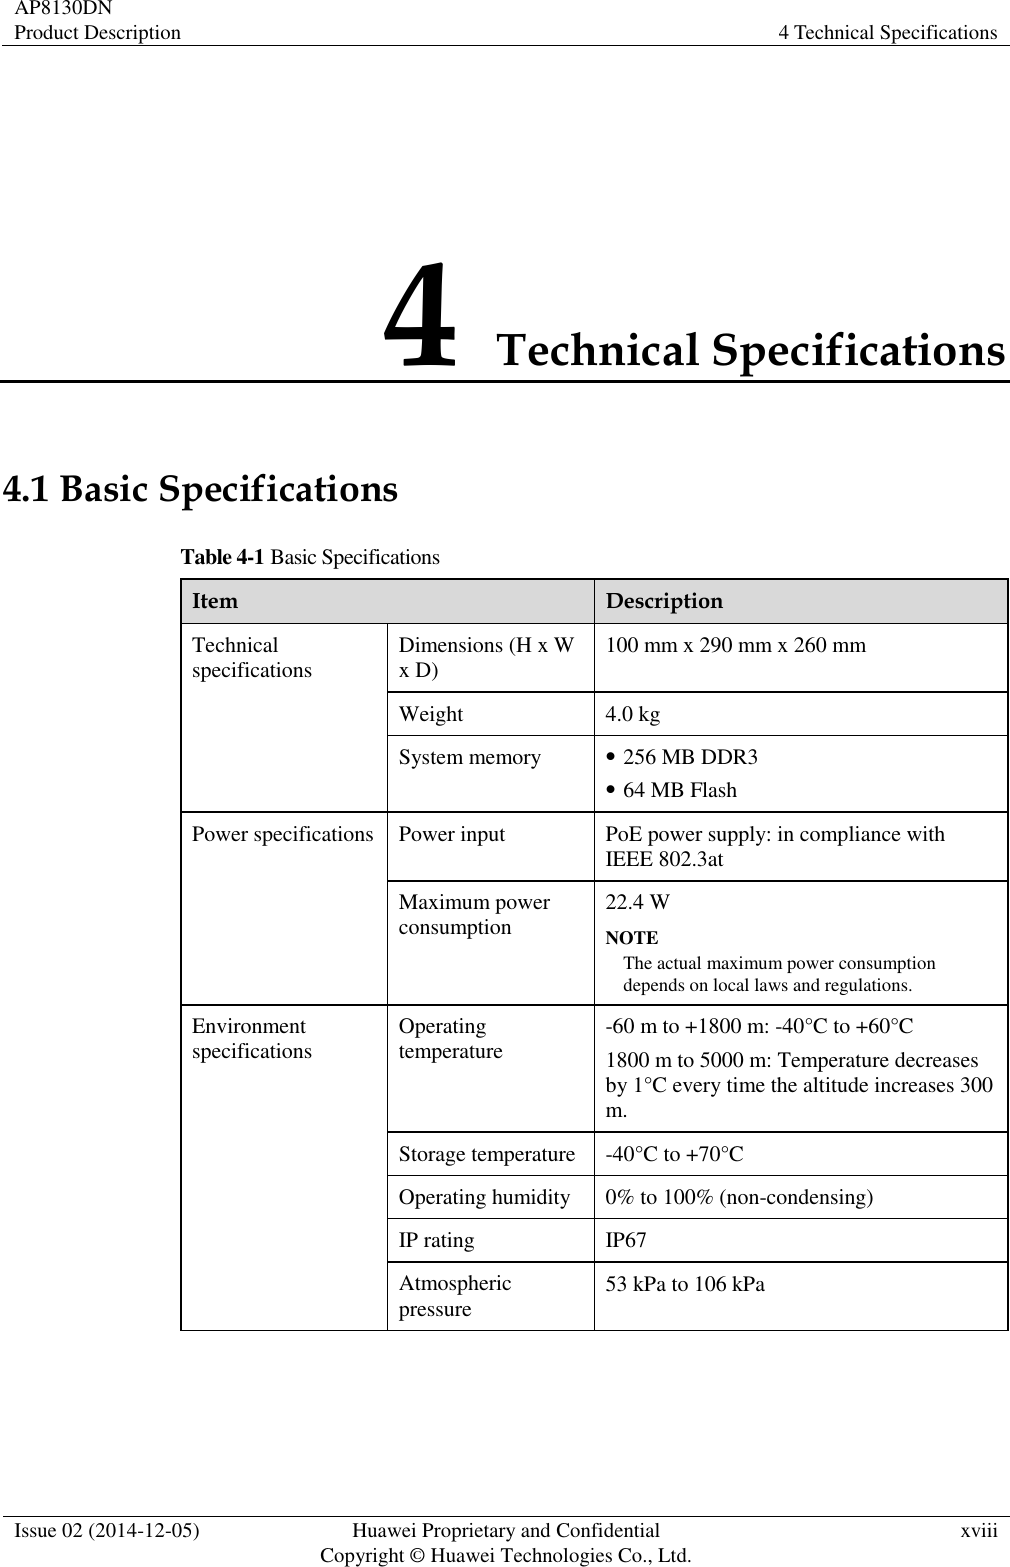 AP8130DN Product Description 4 Technical Specifications  Issue 02 (2014-12-05) Huawei Proprietary and Confidential                                     Copyright © Huawei Technologies Co., Ltd. xviii  4 Technical Specifications 4.1 Basic Specifications Table 4-1 Basic Specifications Item Description Technical specifications Dimensions (H x W x D) 100 mm x 290 mm x 260 mm Weight 4.0 kg System memory  256 MB DDR3  64 MB Flash Power specifications Power input PoE power supply: in compliance with IEEE 802.3at Maximum power consumption 22.4 W NOTE The actual maximum power consumption depends on local laws and regulations. Environment specifications Operating temperature -60 m to +1800 m: -40°C to +60°C 1800 m to 5000 m: Temperature decreases by 1°C every time the altitude increases 300 m. Storage temperature -40°C to +70°C Operating humidity 0% to 100% (non-condensing) IP rating IP67 Atmospheric pressure 53 kPa to 106 kPa  